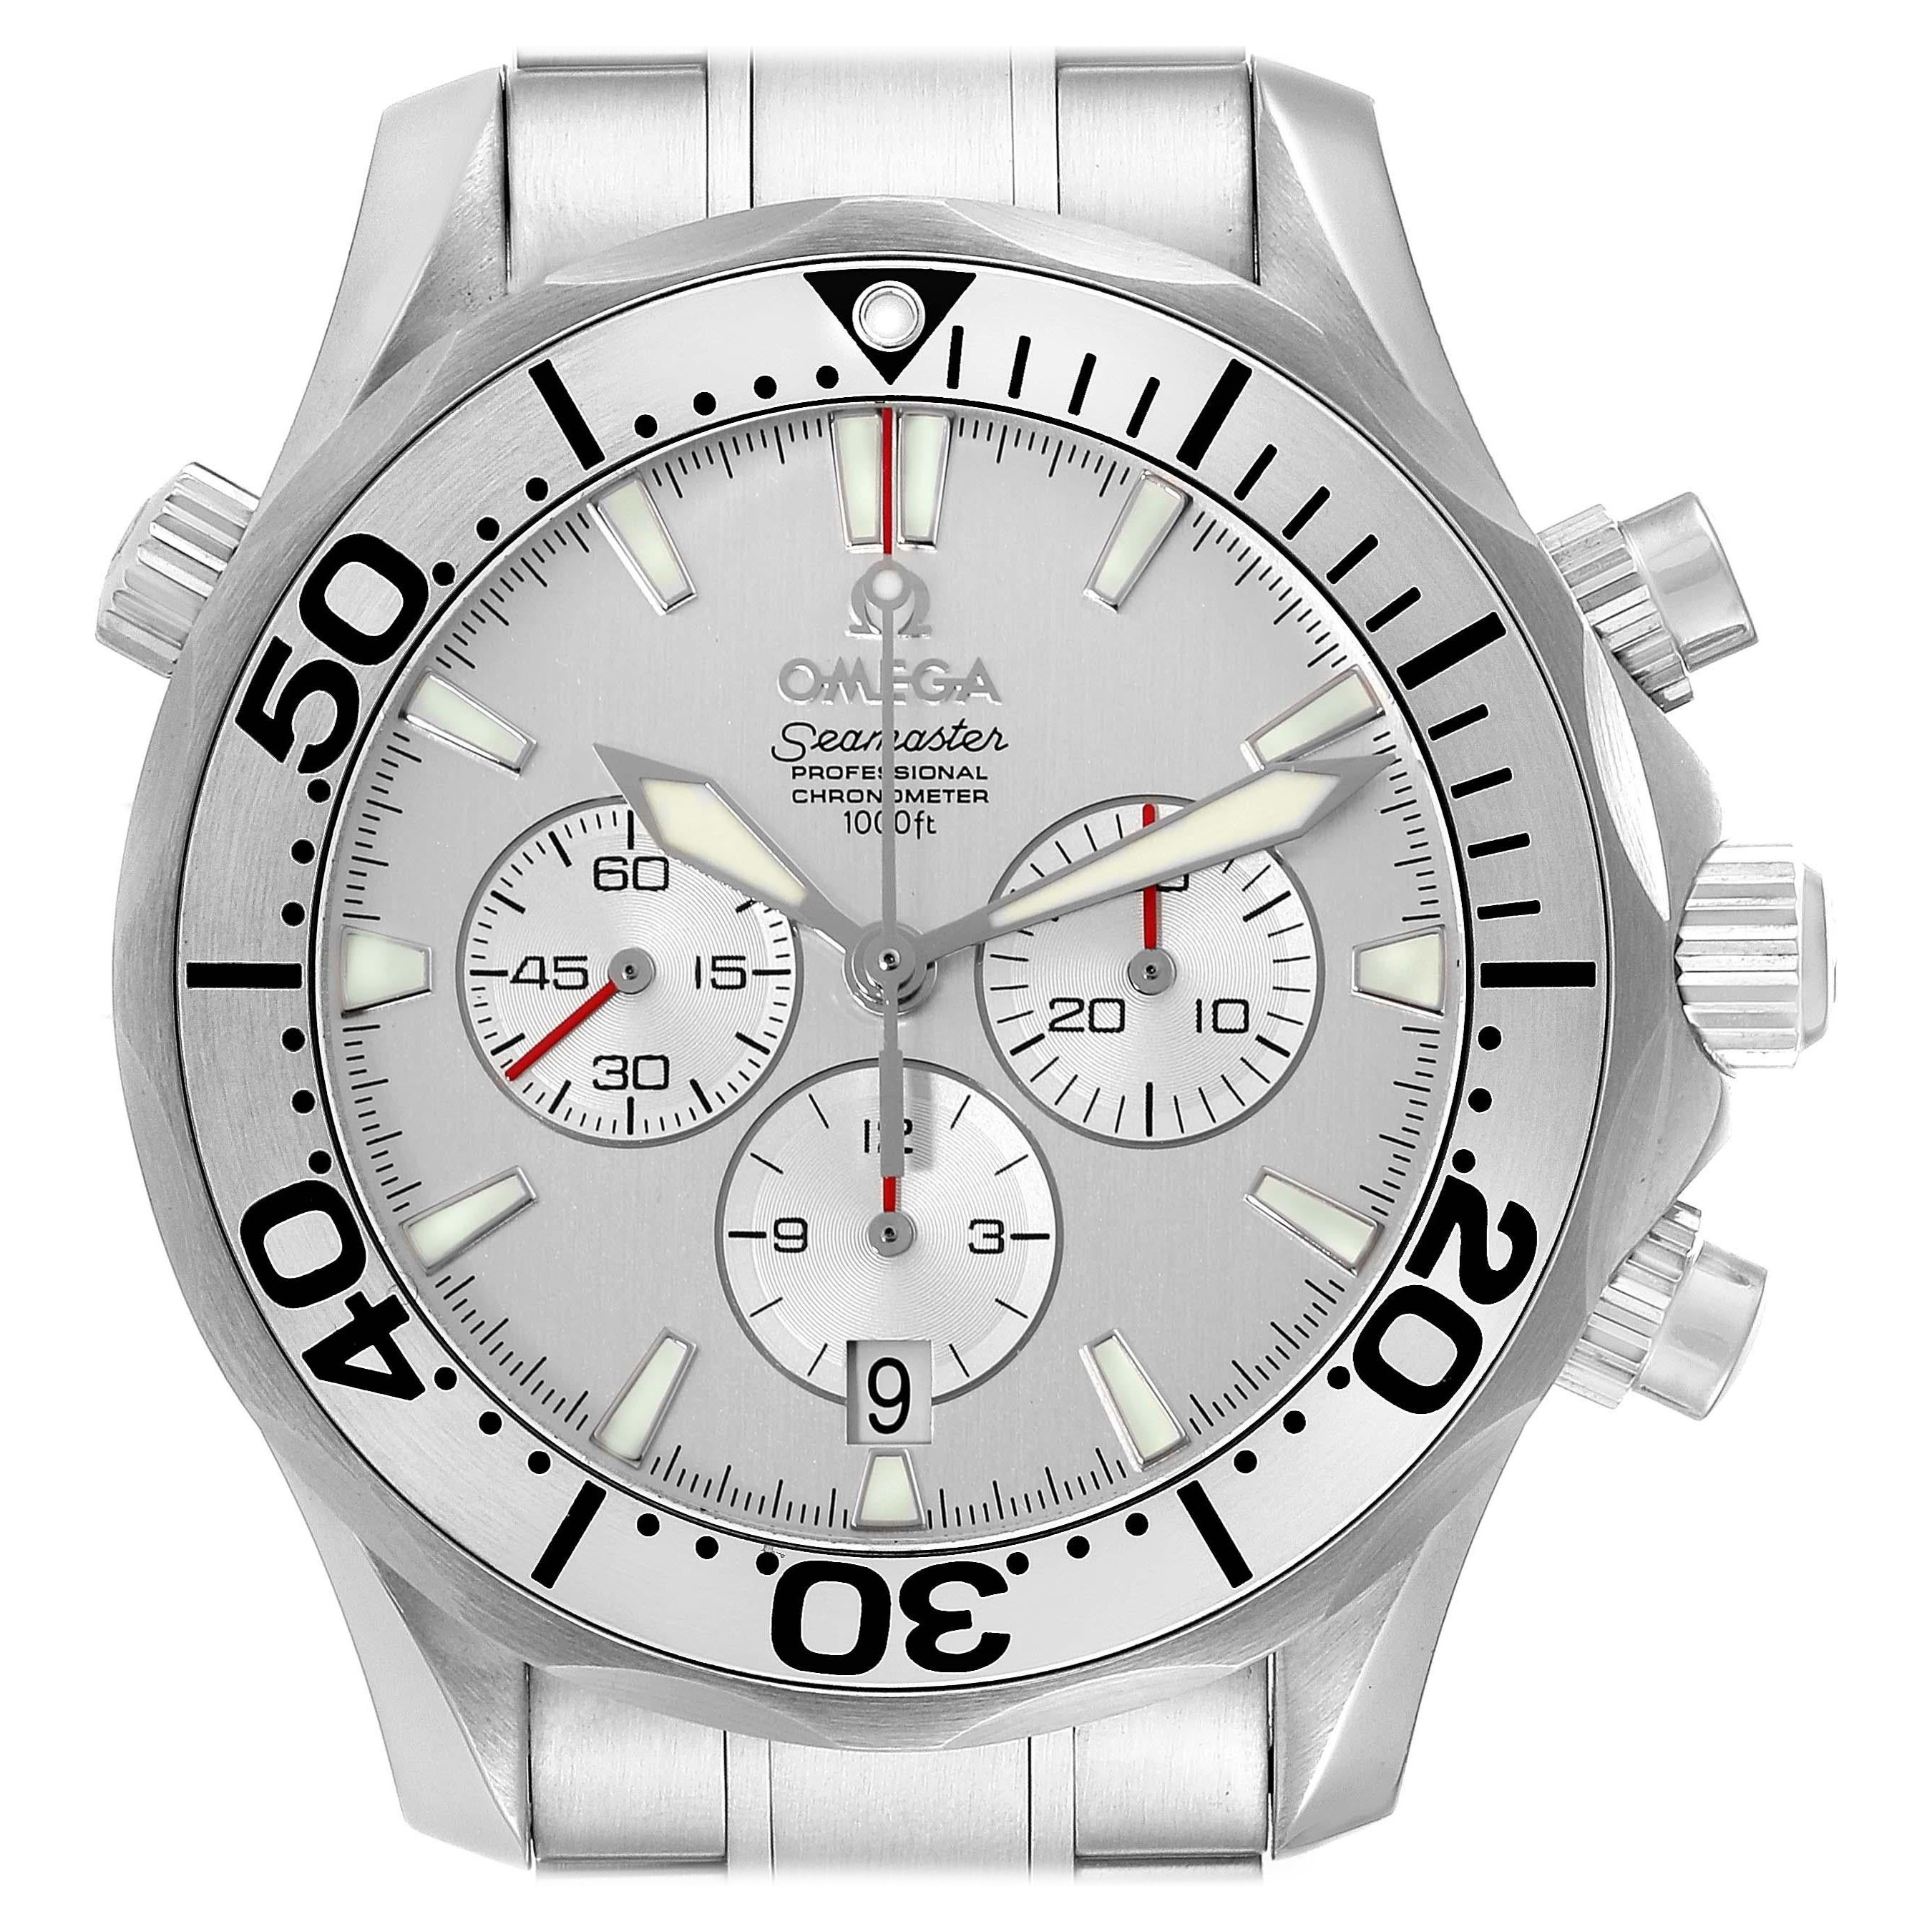 Omega Seamaster Special Edition Chronograph Watch 2589.30.00 Box Card